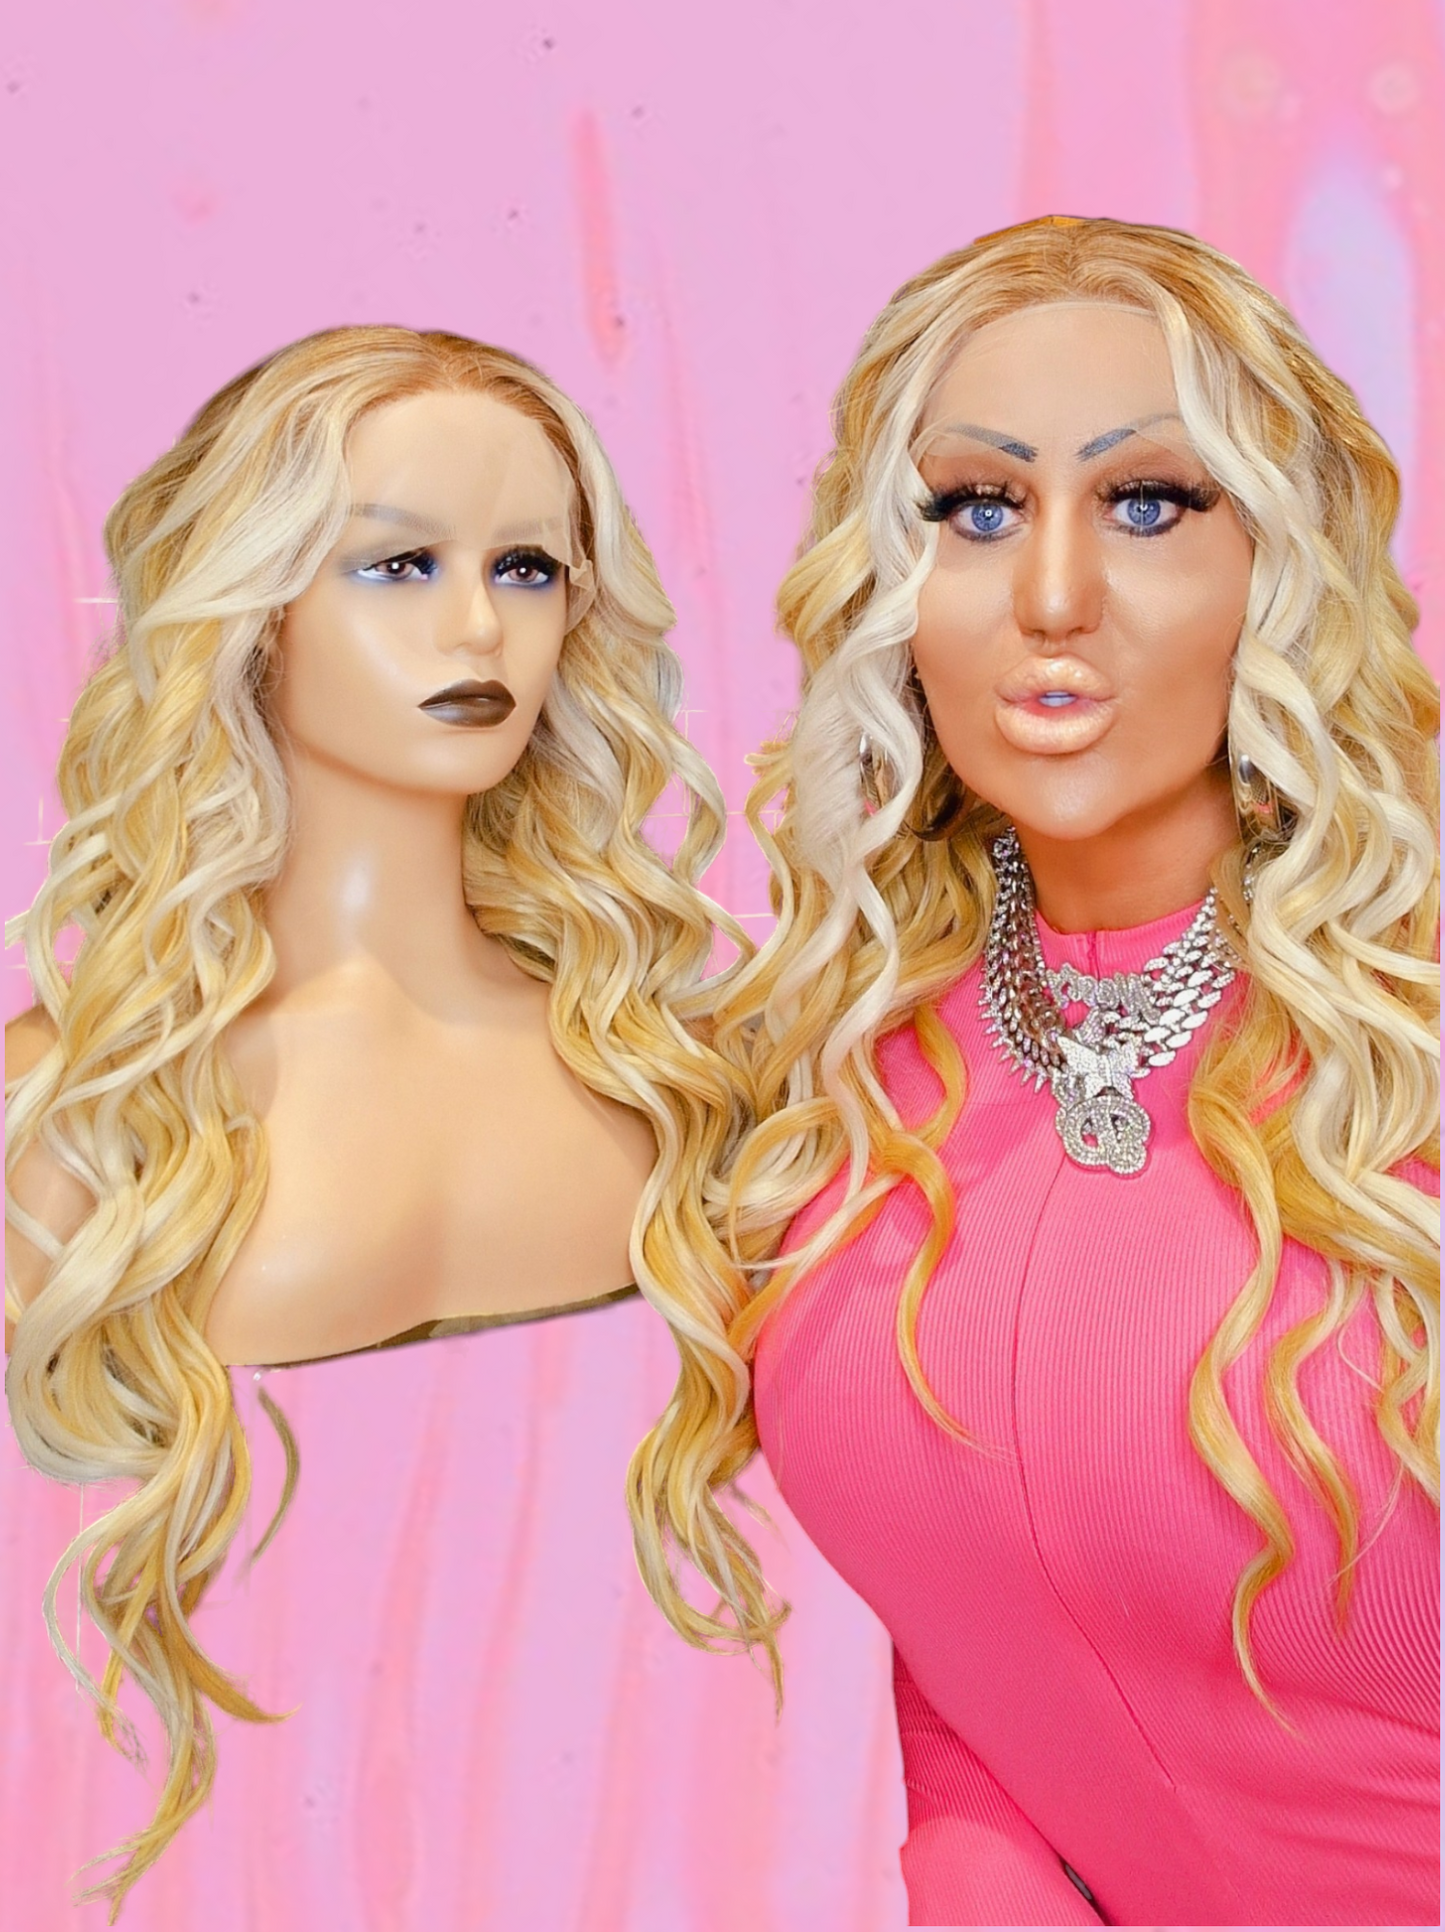 Defined Wave Blonde Streaked Middle Part Lace Front Wig. Agatha